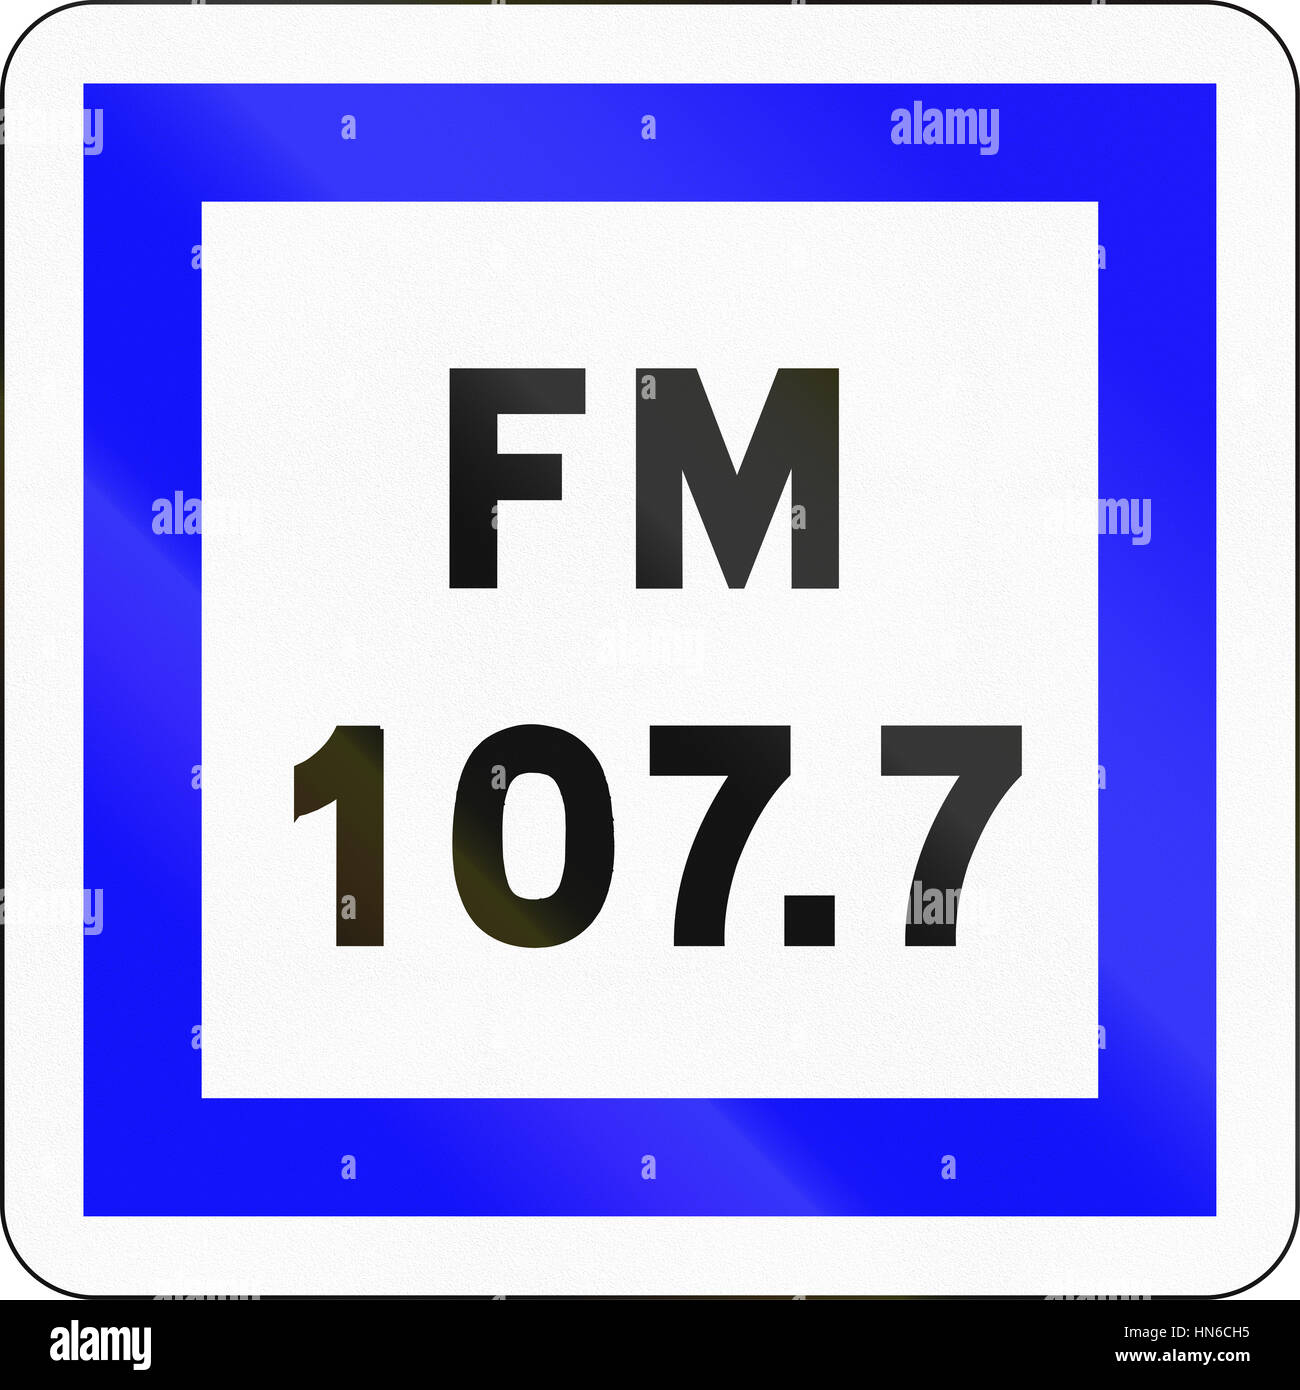 Road sign used in France - Radio station for road and traffic information  Stock Photo - Alamy